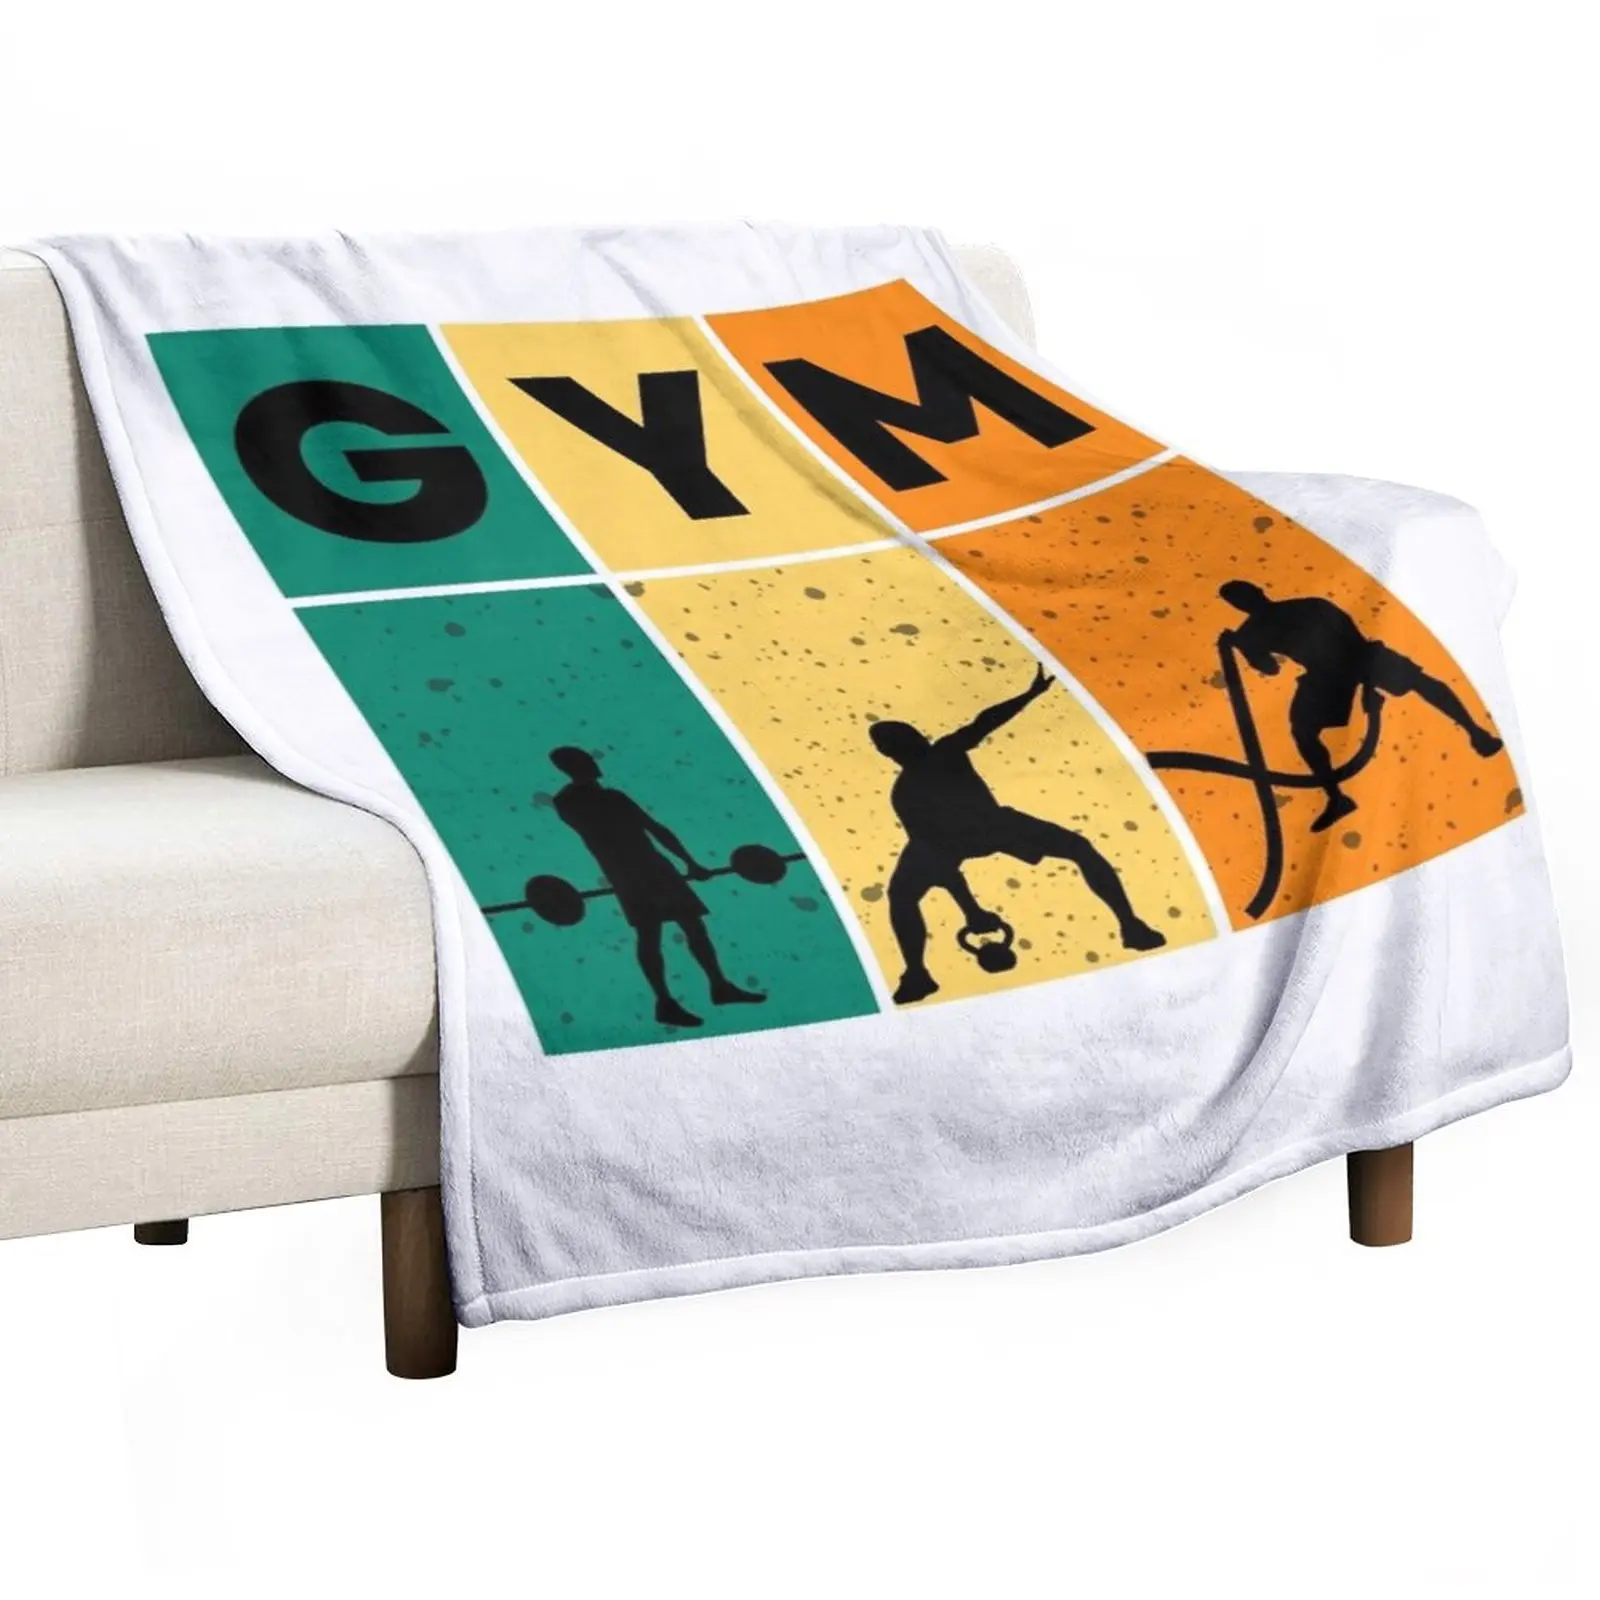 

New GYM Throw Blanket Bed linens Camping Blanket blankets and throws